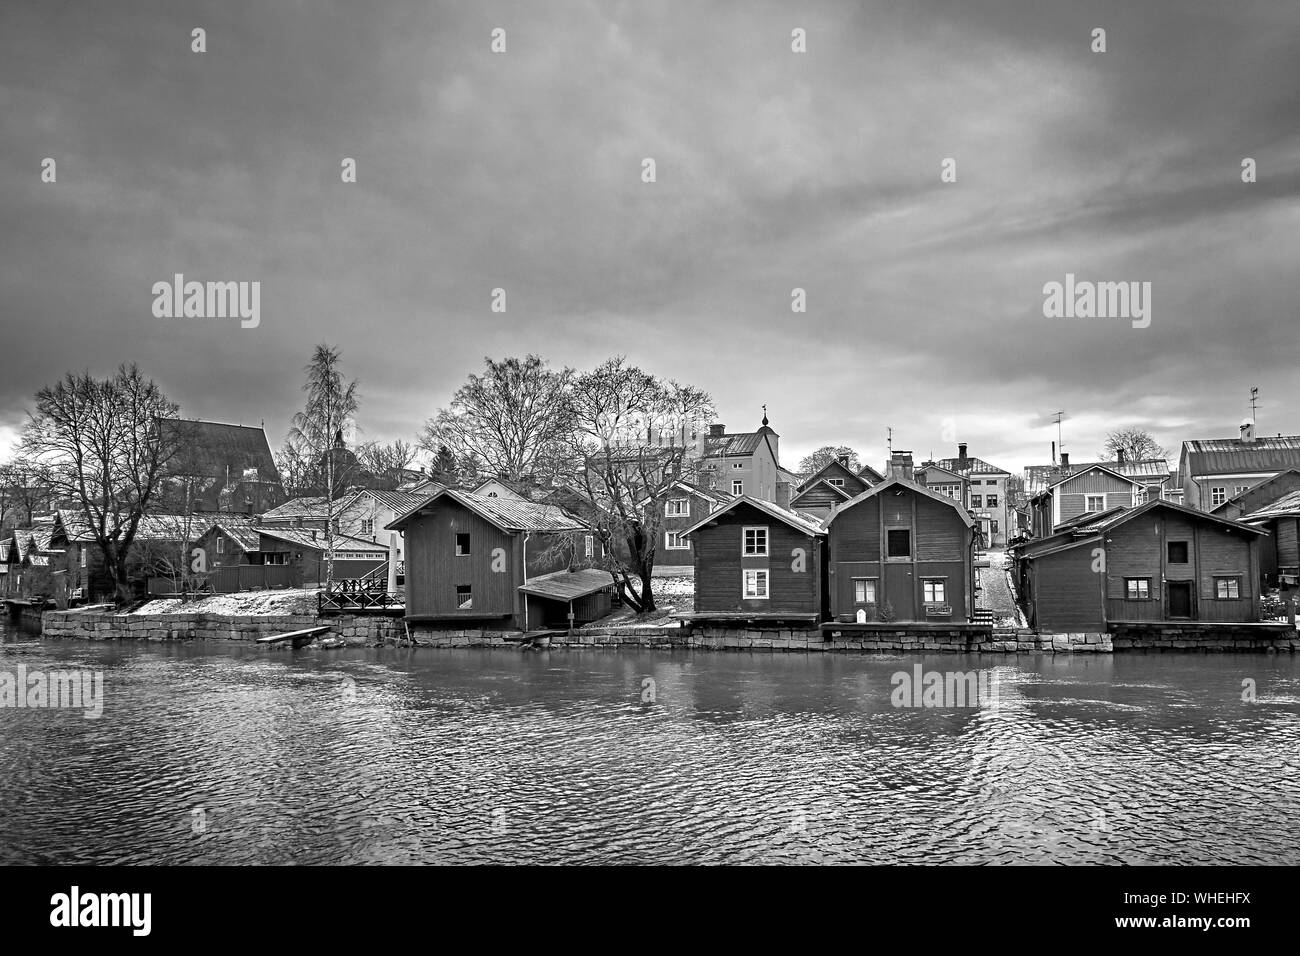 Old historic Porvoo, Finland with wooden houses and medieval stone and brick Porvoo Cathedral at blue hour sunrise. Stock Photo